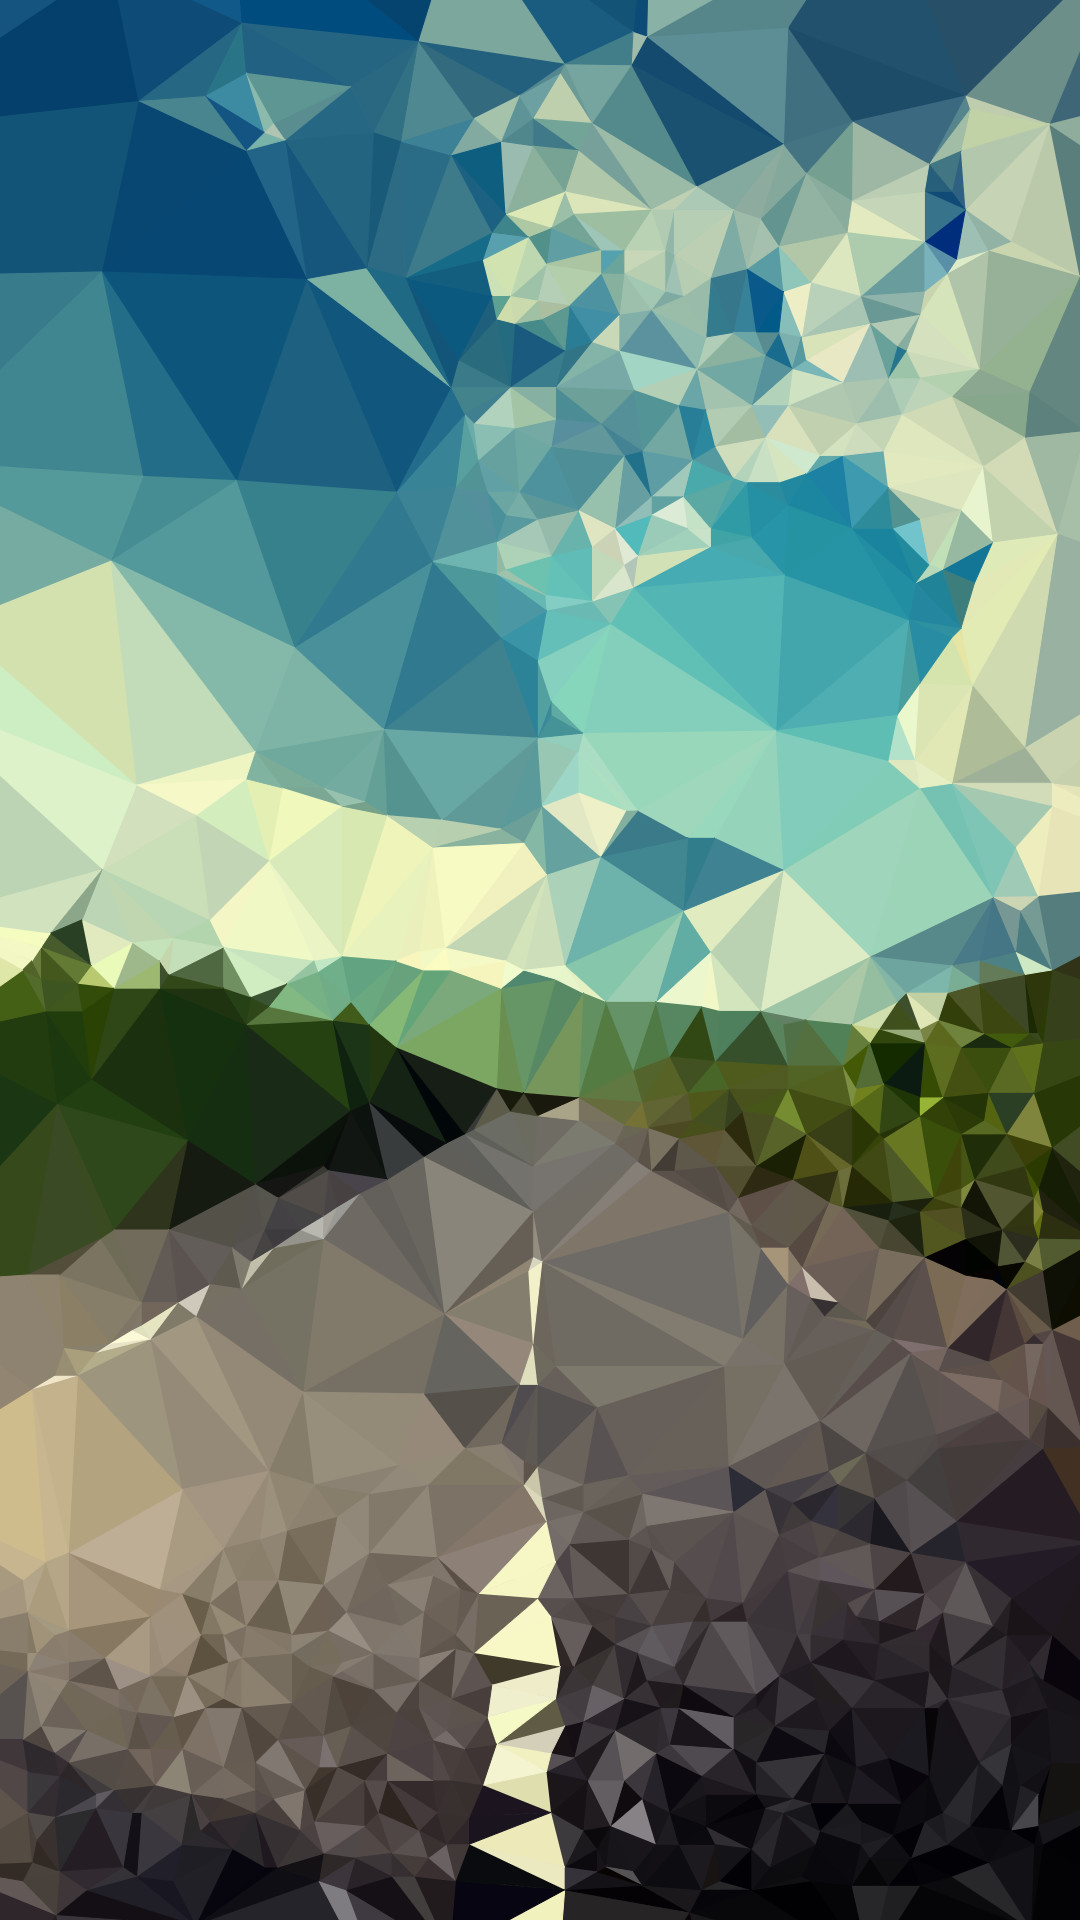 1080x1920 Tap image for more iPhone 6 Wallpapers! Landscape road polygon - @mobile9